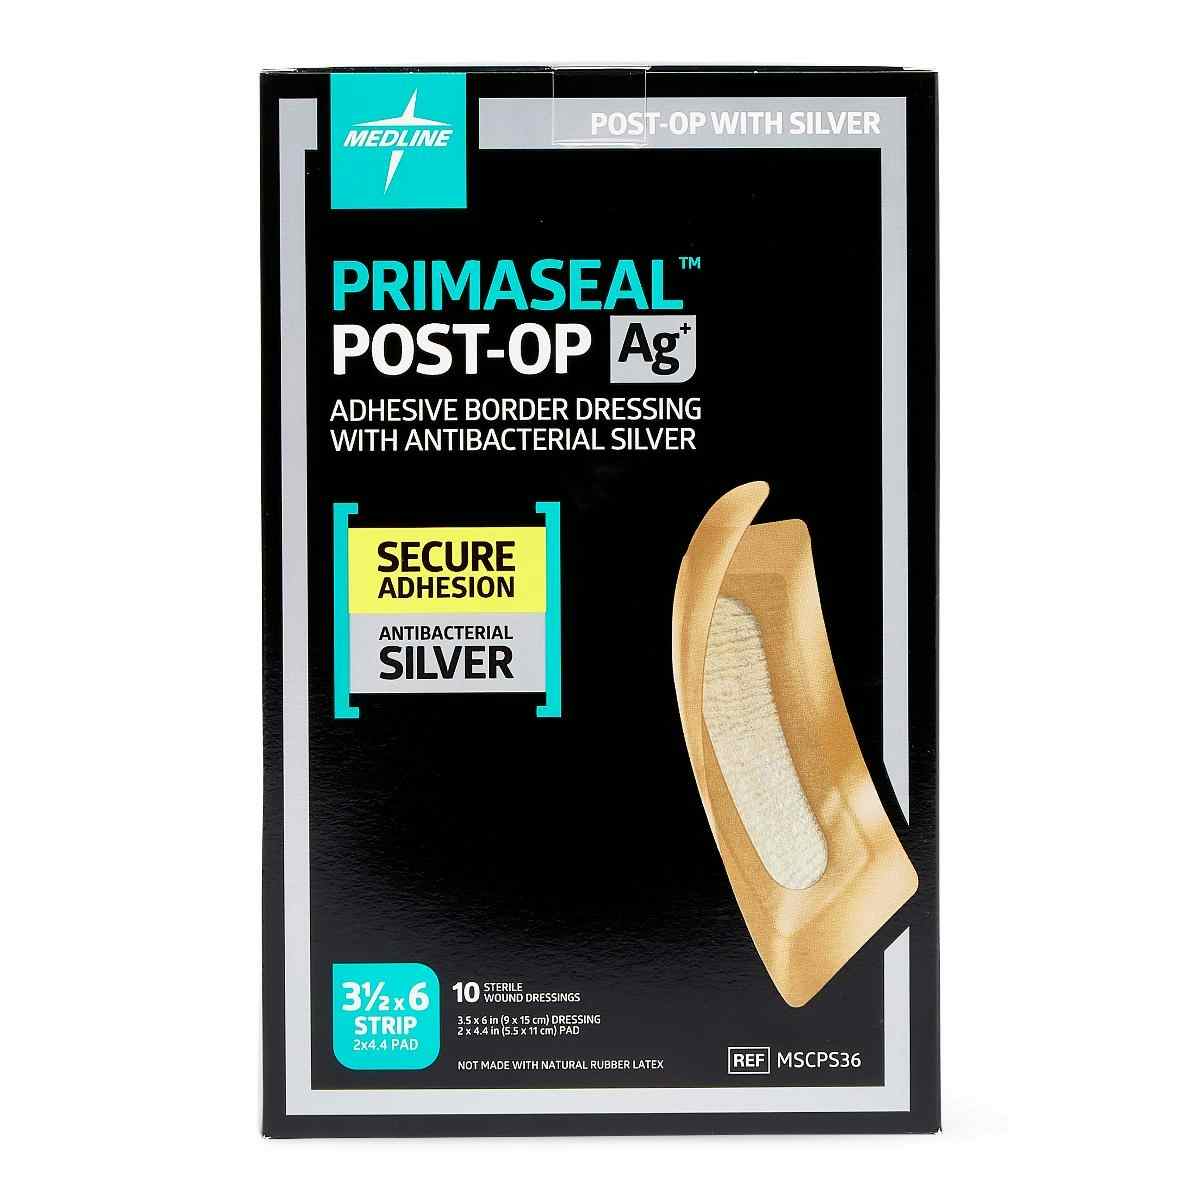 PrimaSeal Ag+ Post-Op Adhesive Dressing, MSCPS36Z, 3 1/2" X 6" - Box of 10